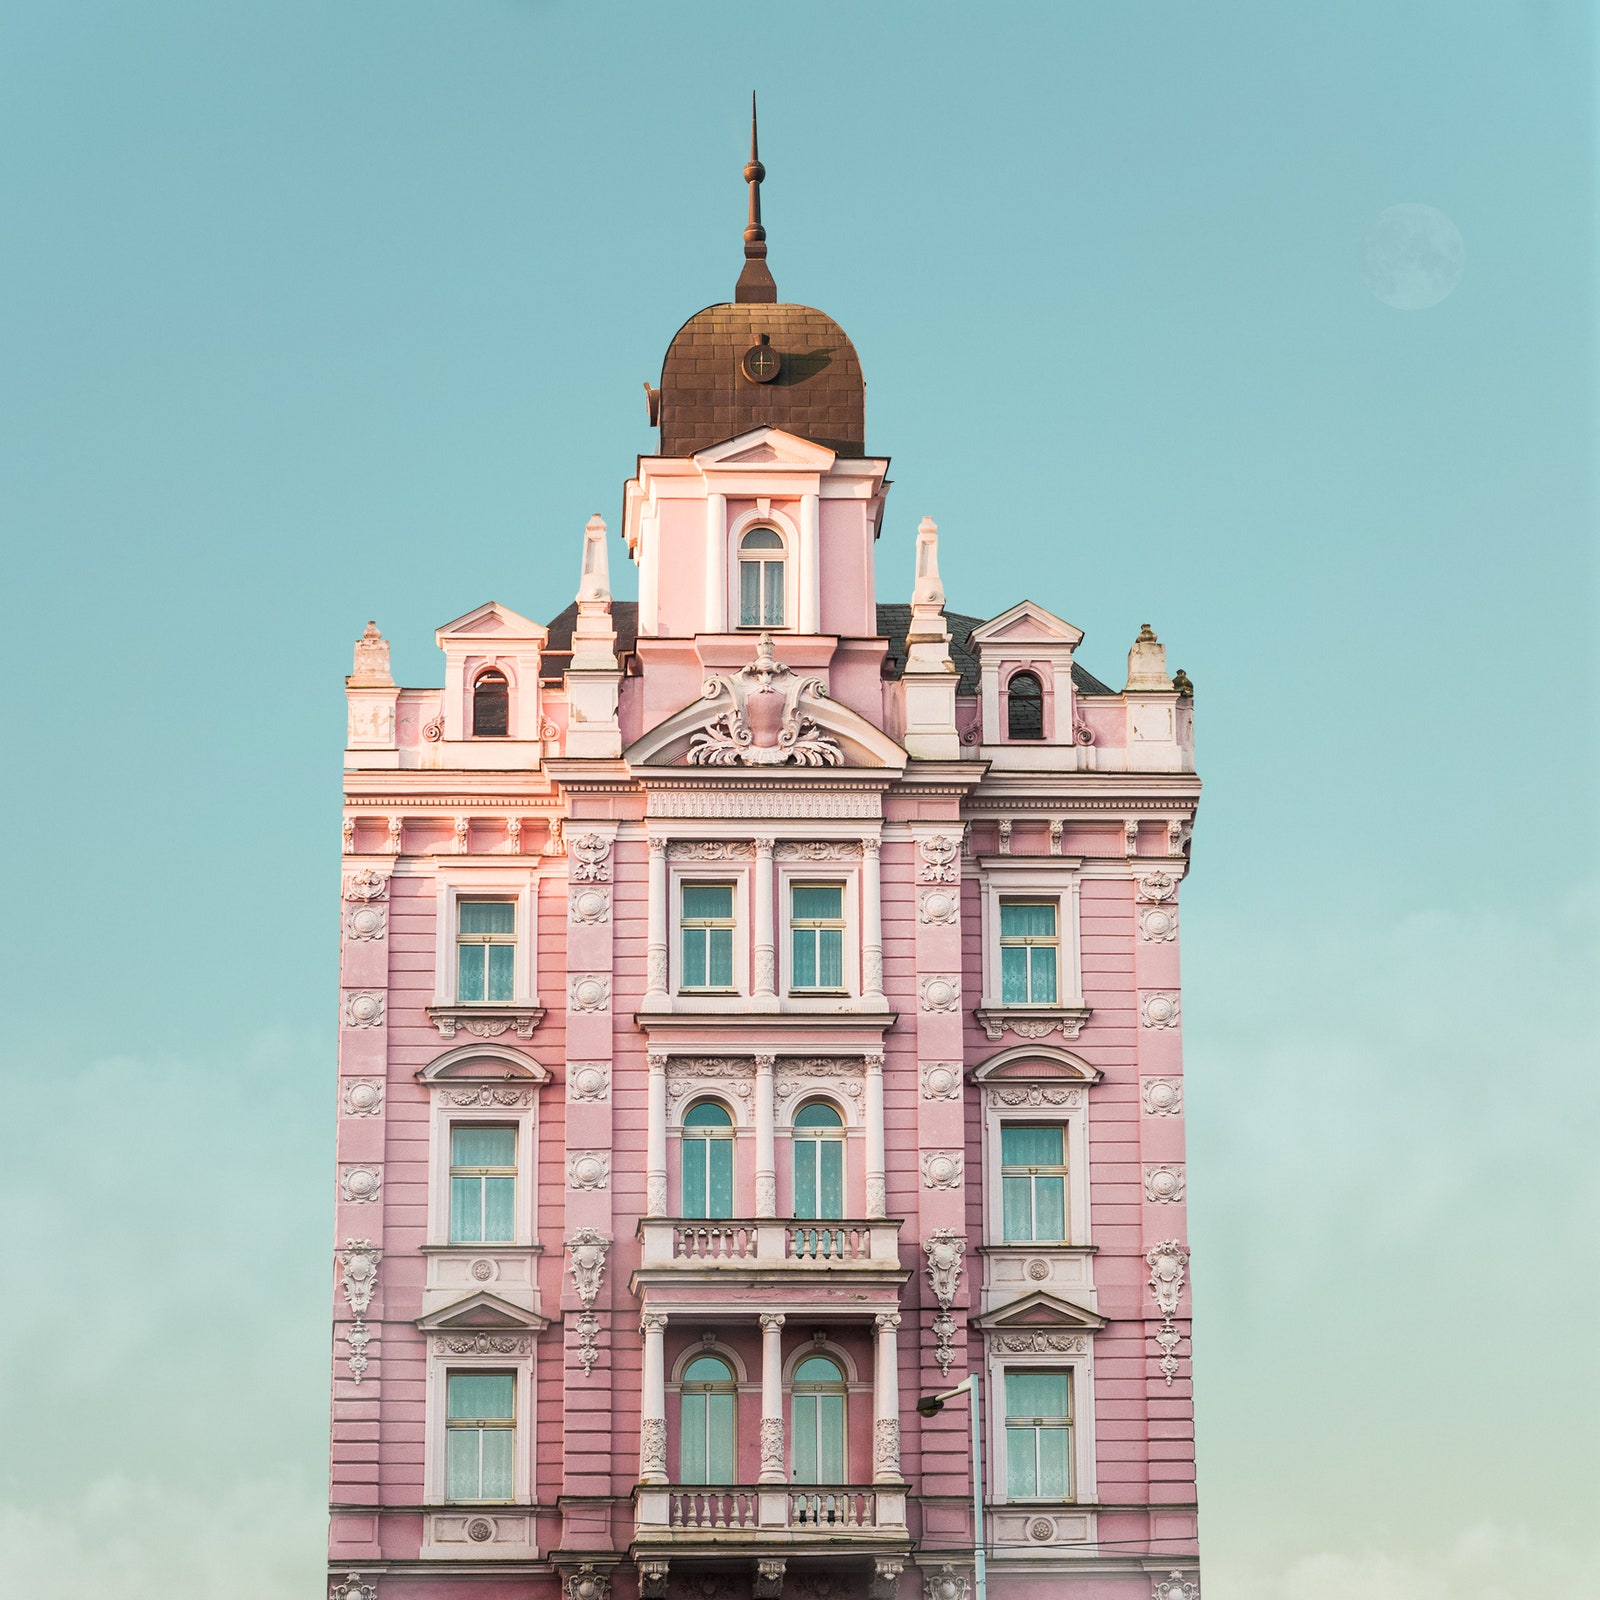 Hotel Opera Prague Czech Republic c. 1891. Photo by Valentina Jacks. Accidentally Wes Anderson by Wally Koval published...